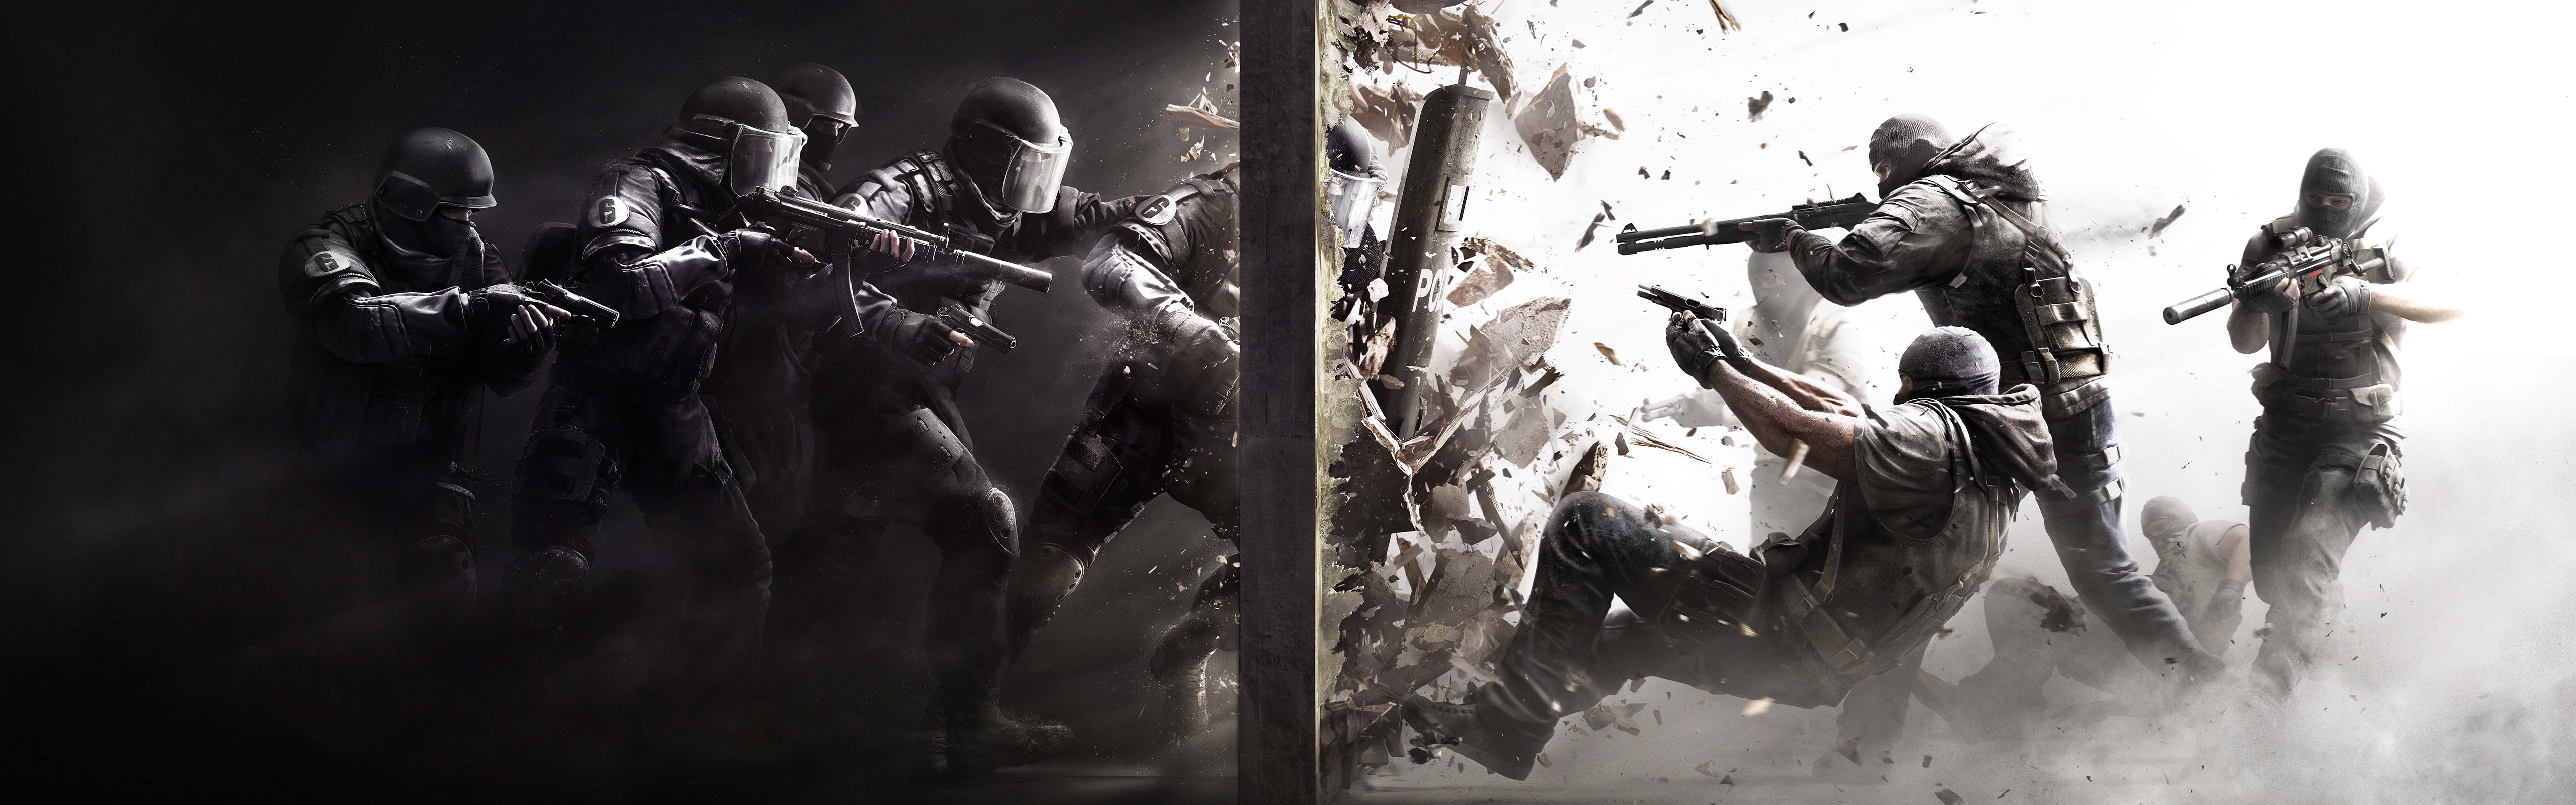 Rainbow Six Video Games Tactical Special Forces Dual Monitors Multiple Display 5120x1600